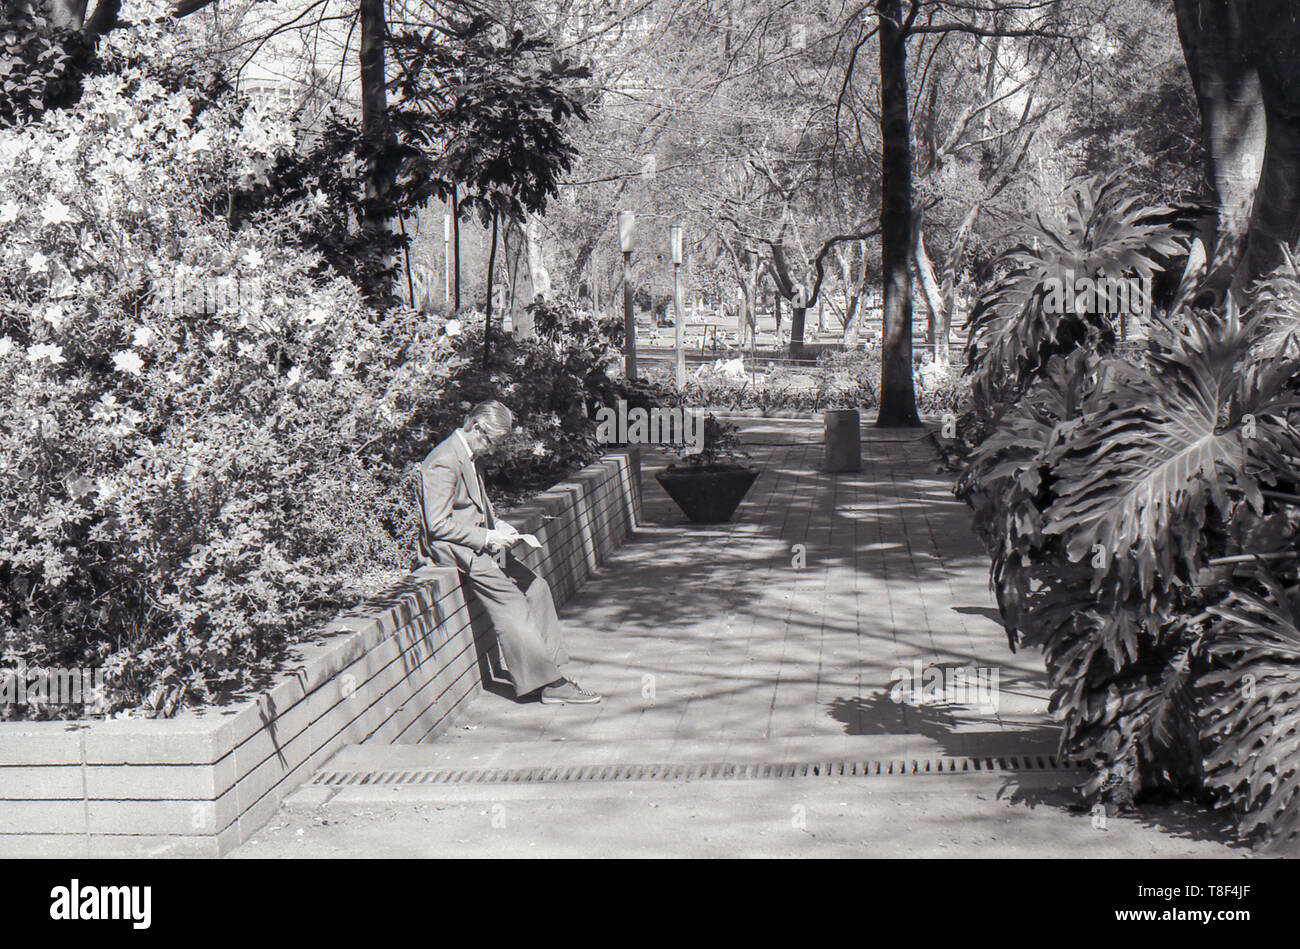 1977 Sydney Australia: A man dressed in a suit and wearing glasses finds a quiet sunny spot against a raised garden bed on a path inside Sydney's Hyde Park and reads a letter. Note the flared trousers. Stock Photo